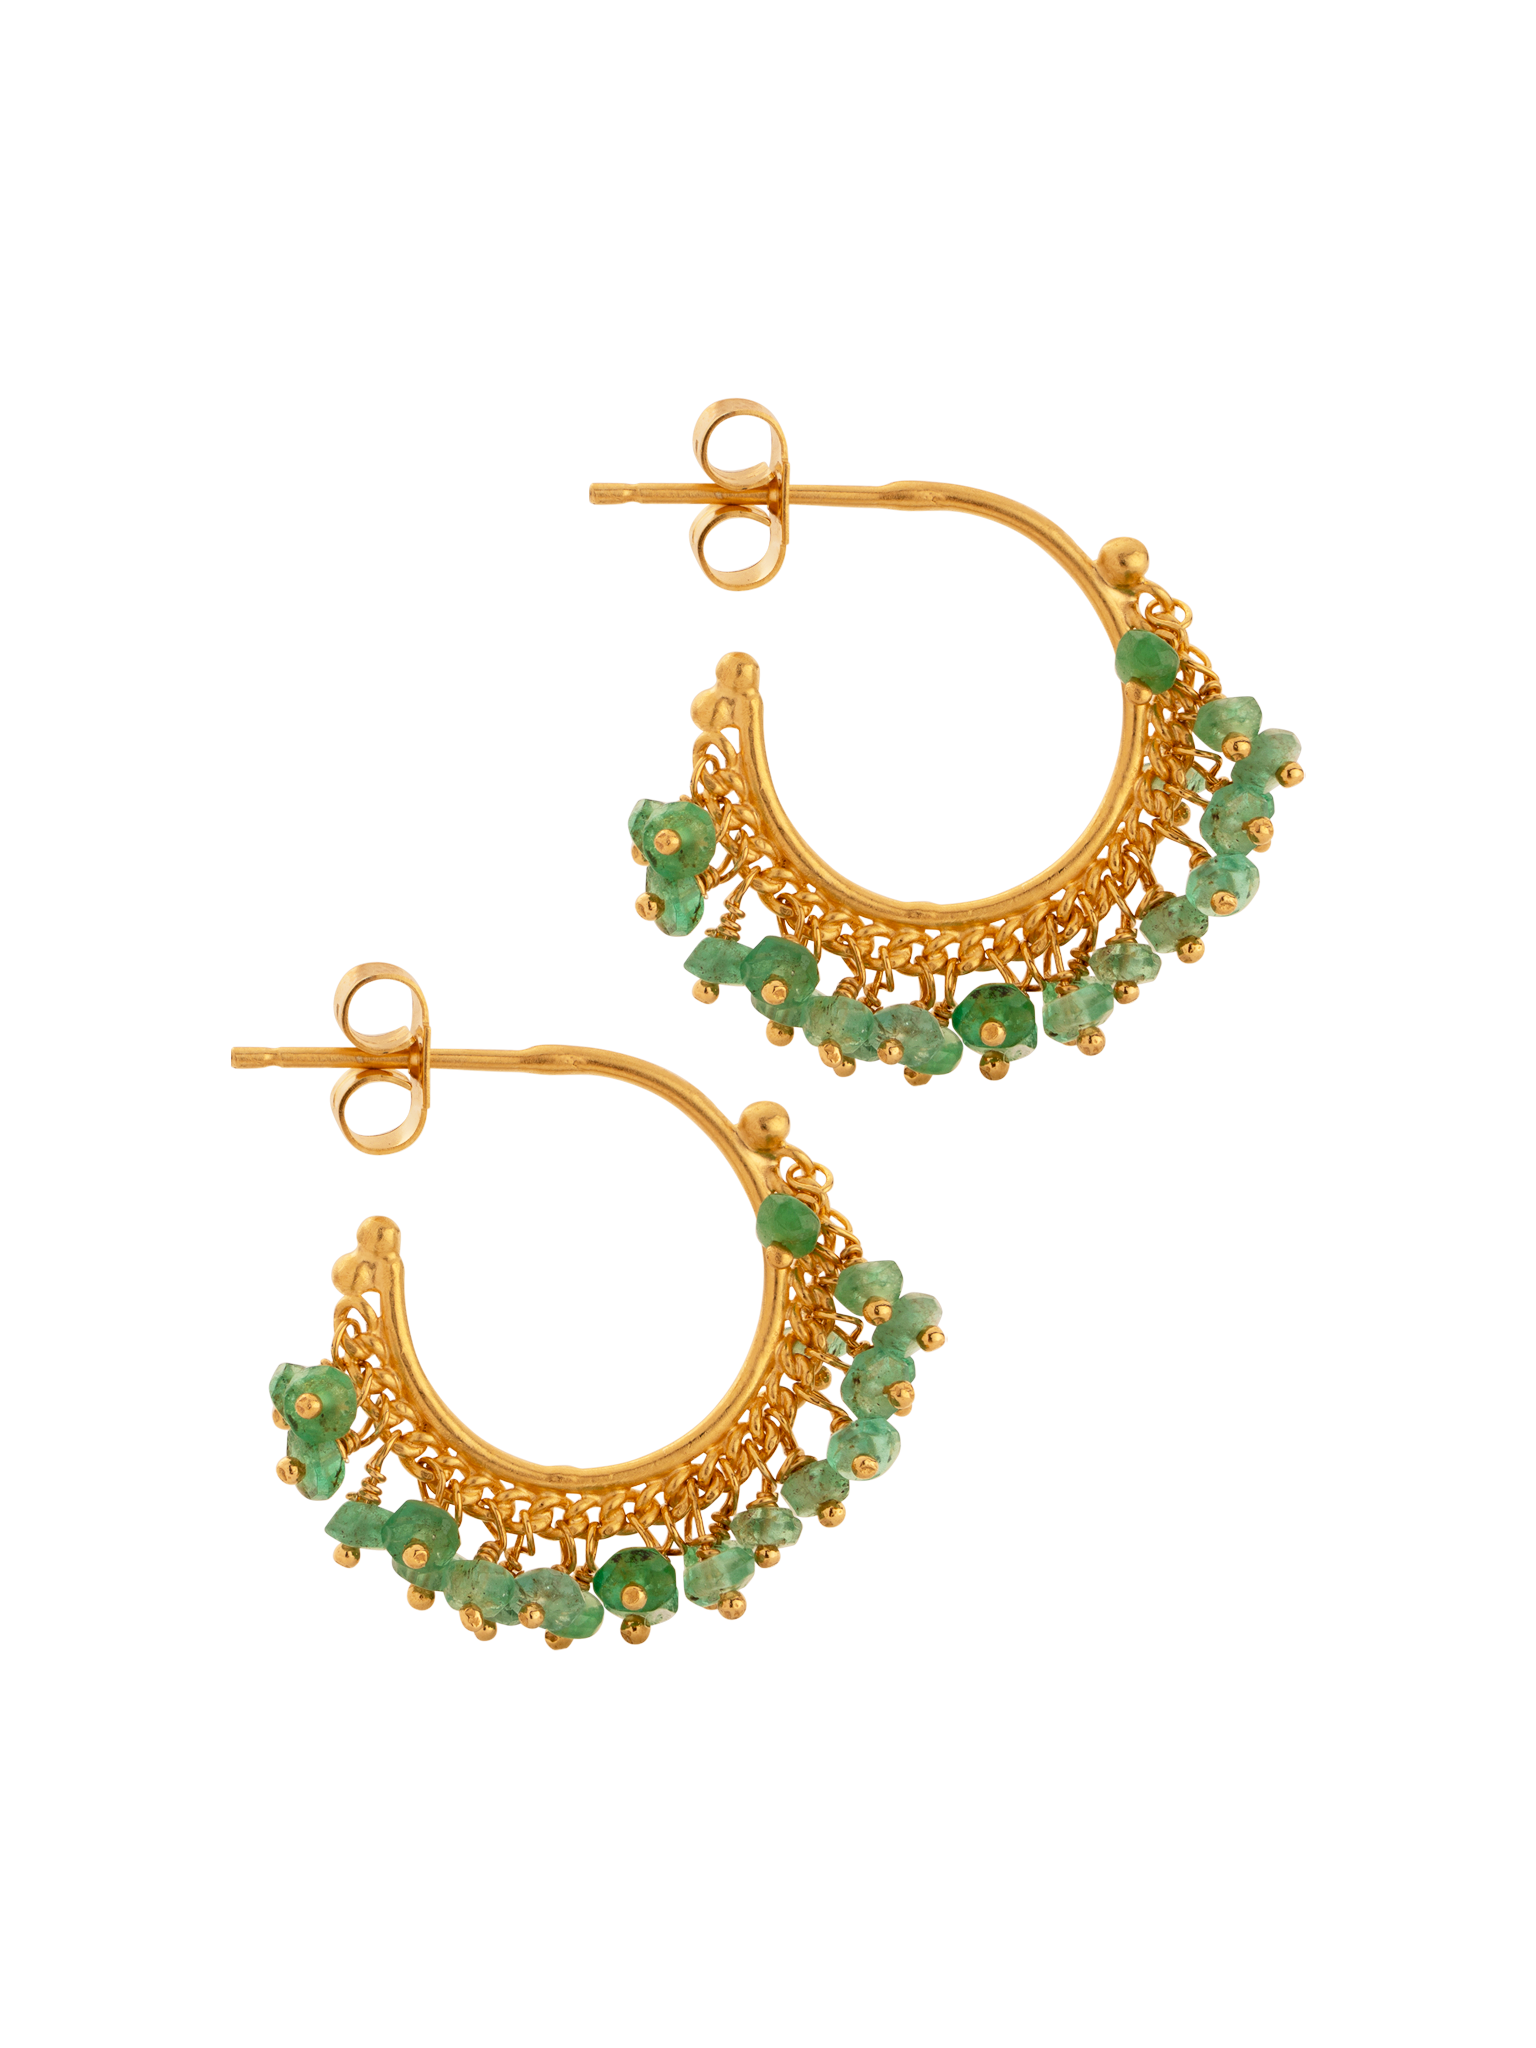 Hoop earrings in emerald and gold plated silver